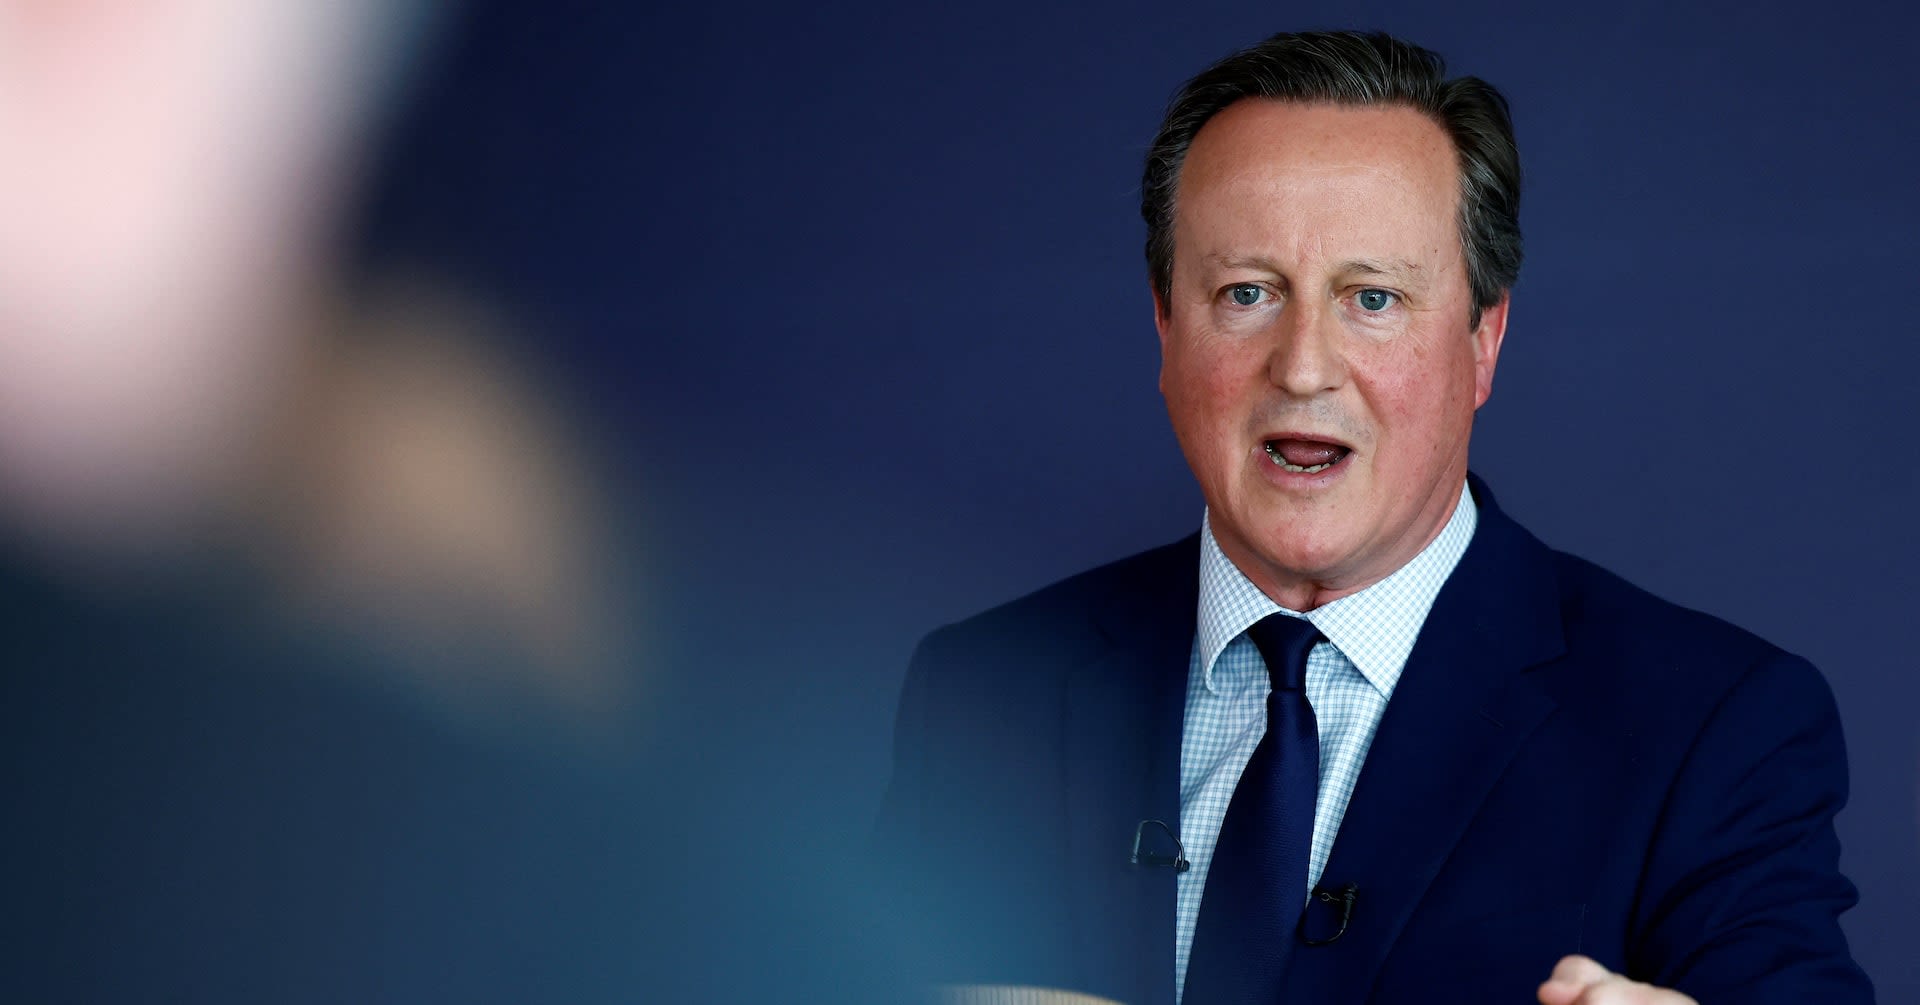 UK system of arms exports to Israel not the same as U.S., Cameron says